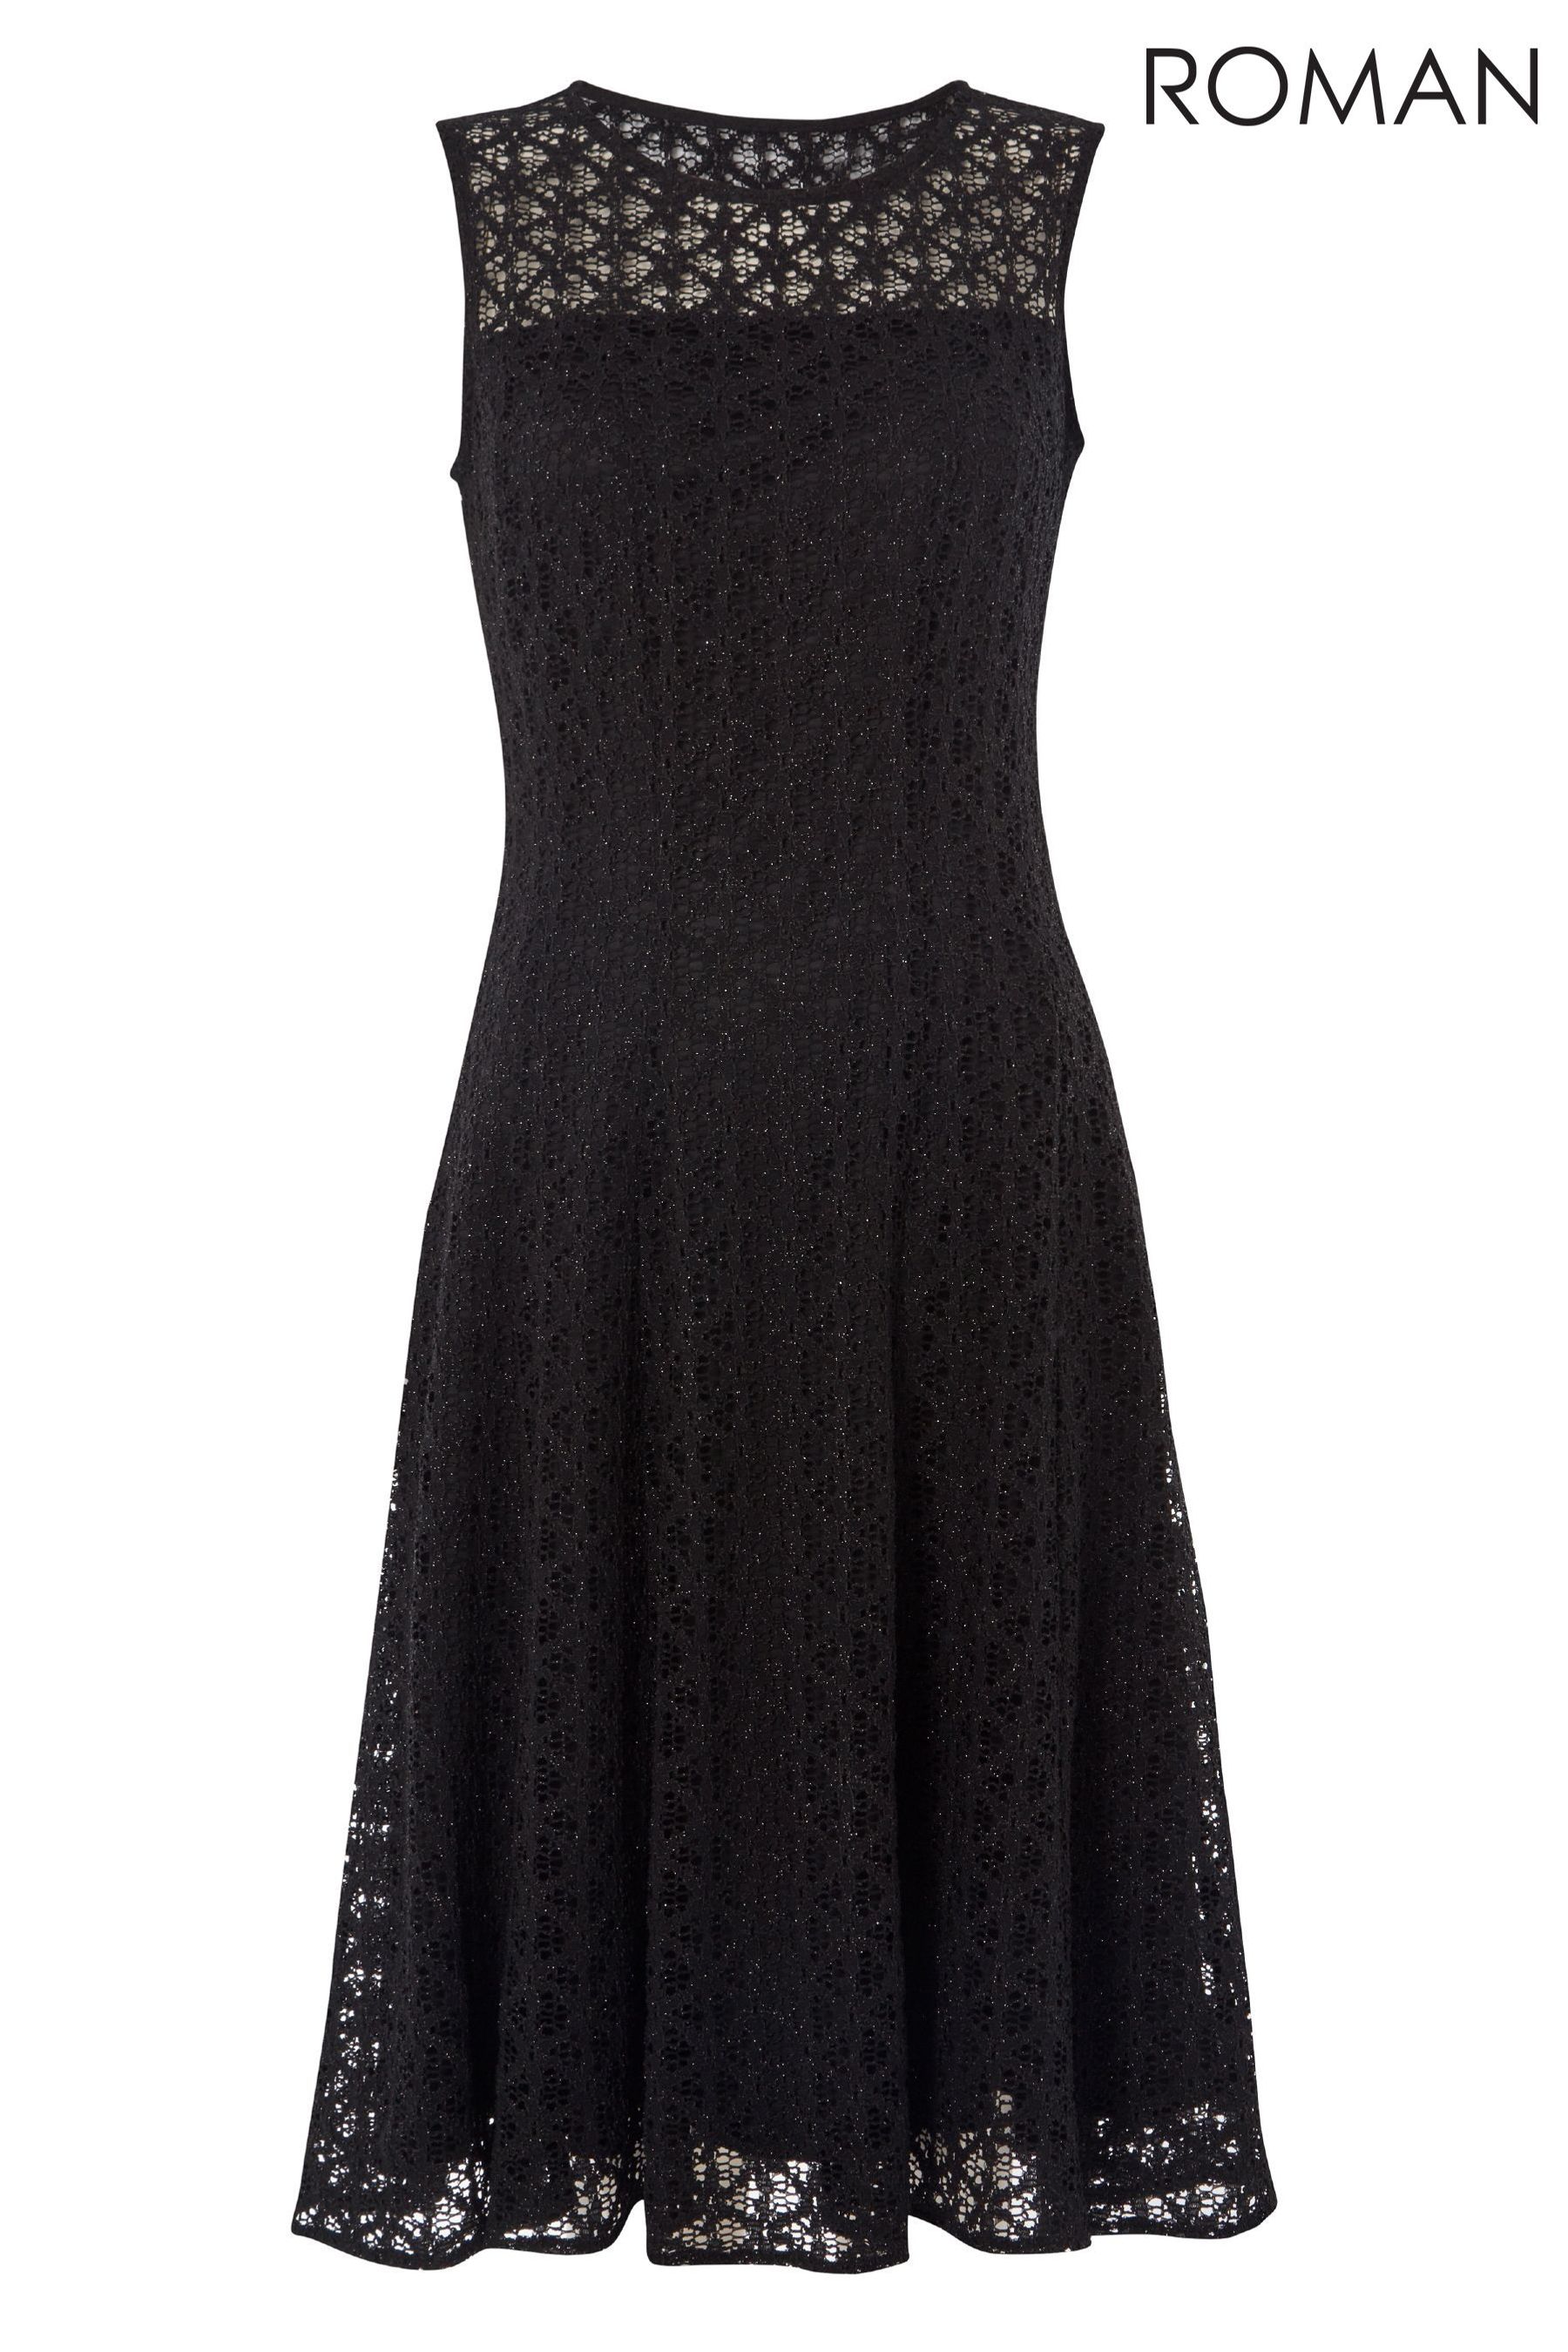 Buy Roman Black Lace Fit and Flare Dress from the Next UK online shop